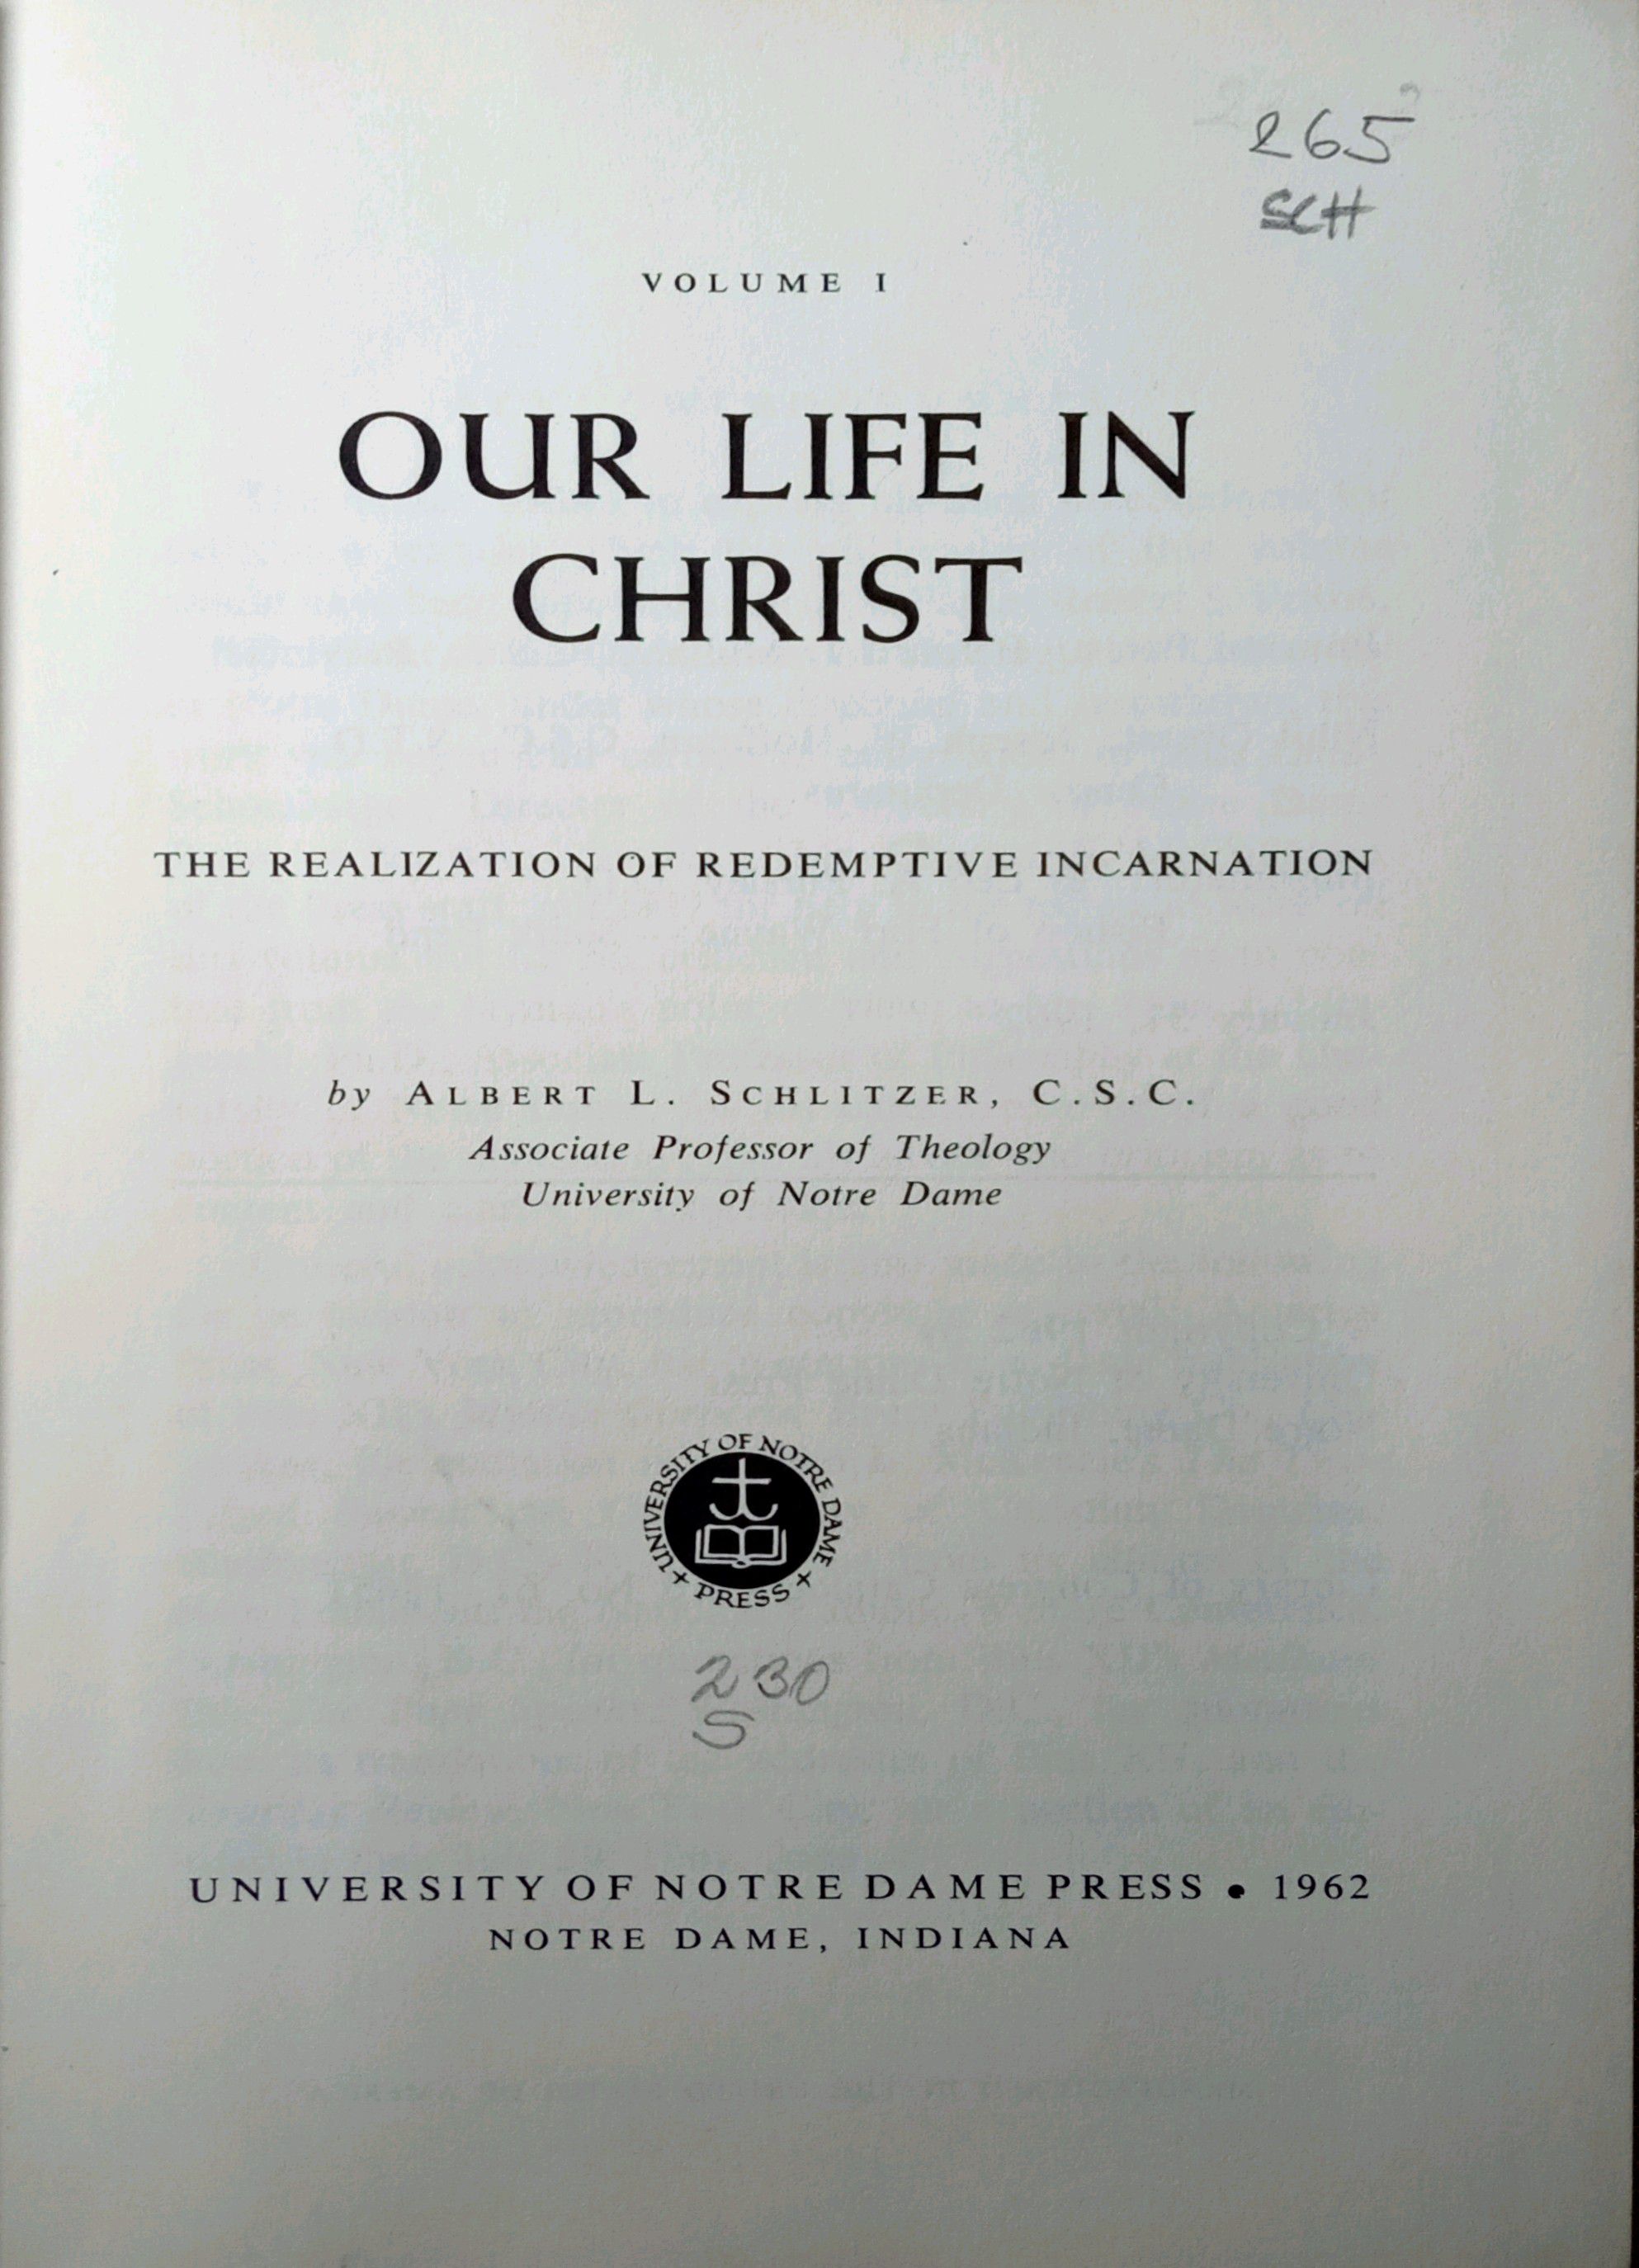 VOLUME I: OUR LIFE IN CHRIST